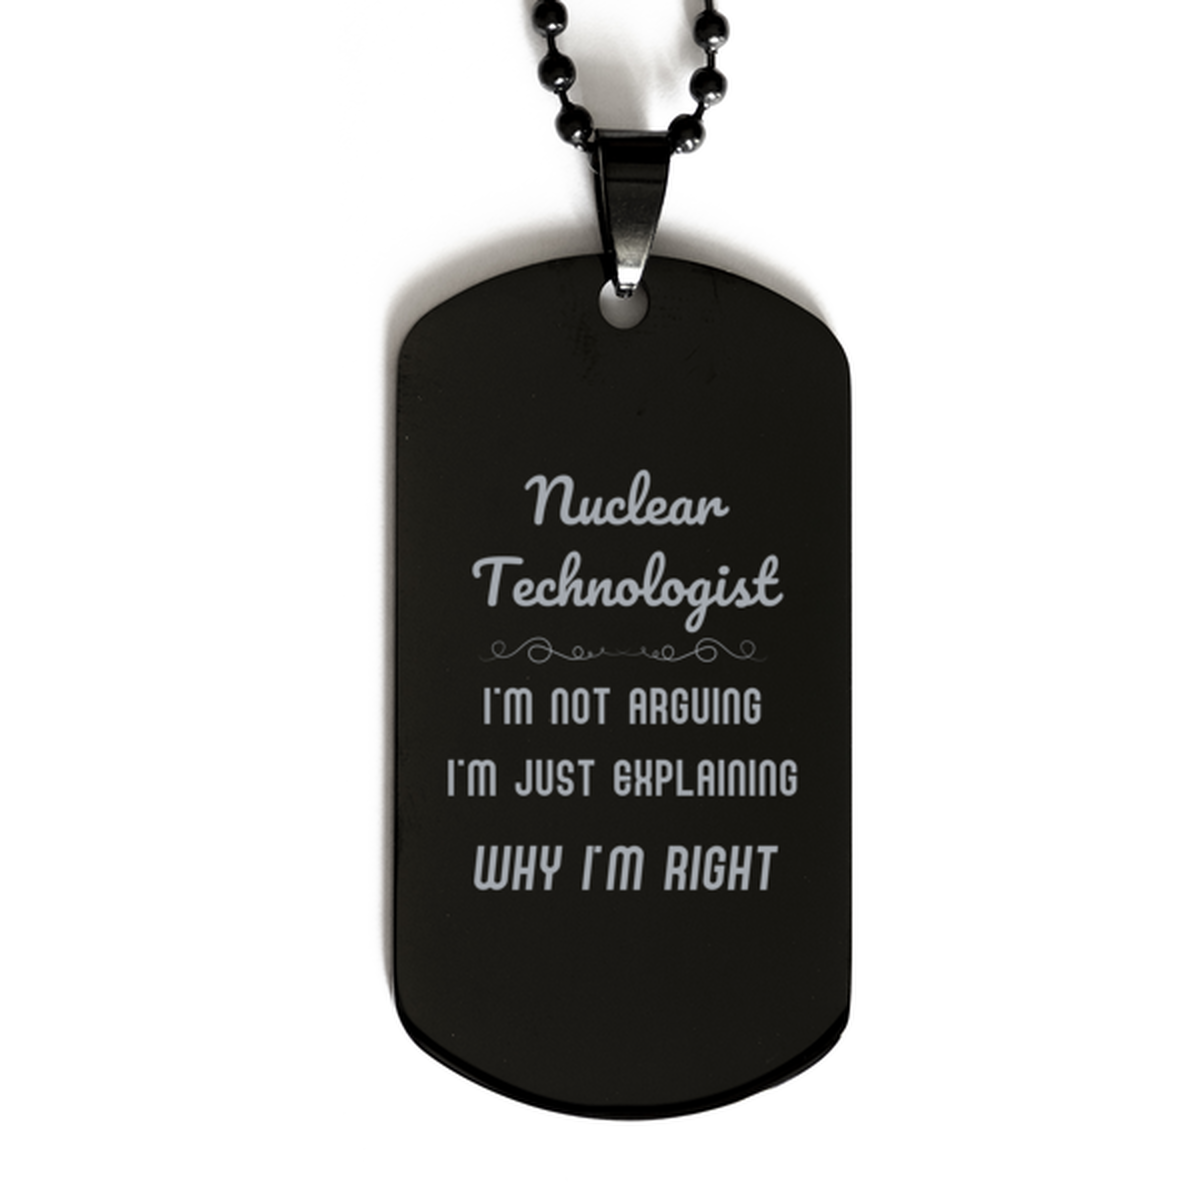 Nuclear Technologist I'm not Arguing. I'm Just Explaining Why I'm RIGHT Black Dog Tag, Funny Saying Quote Nuclear Technologist Gifts For Nuclear Technologist Graduation Birthday Christmas Gifts for Men Women Coworker